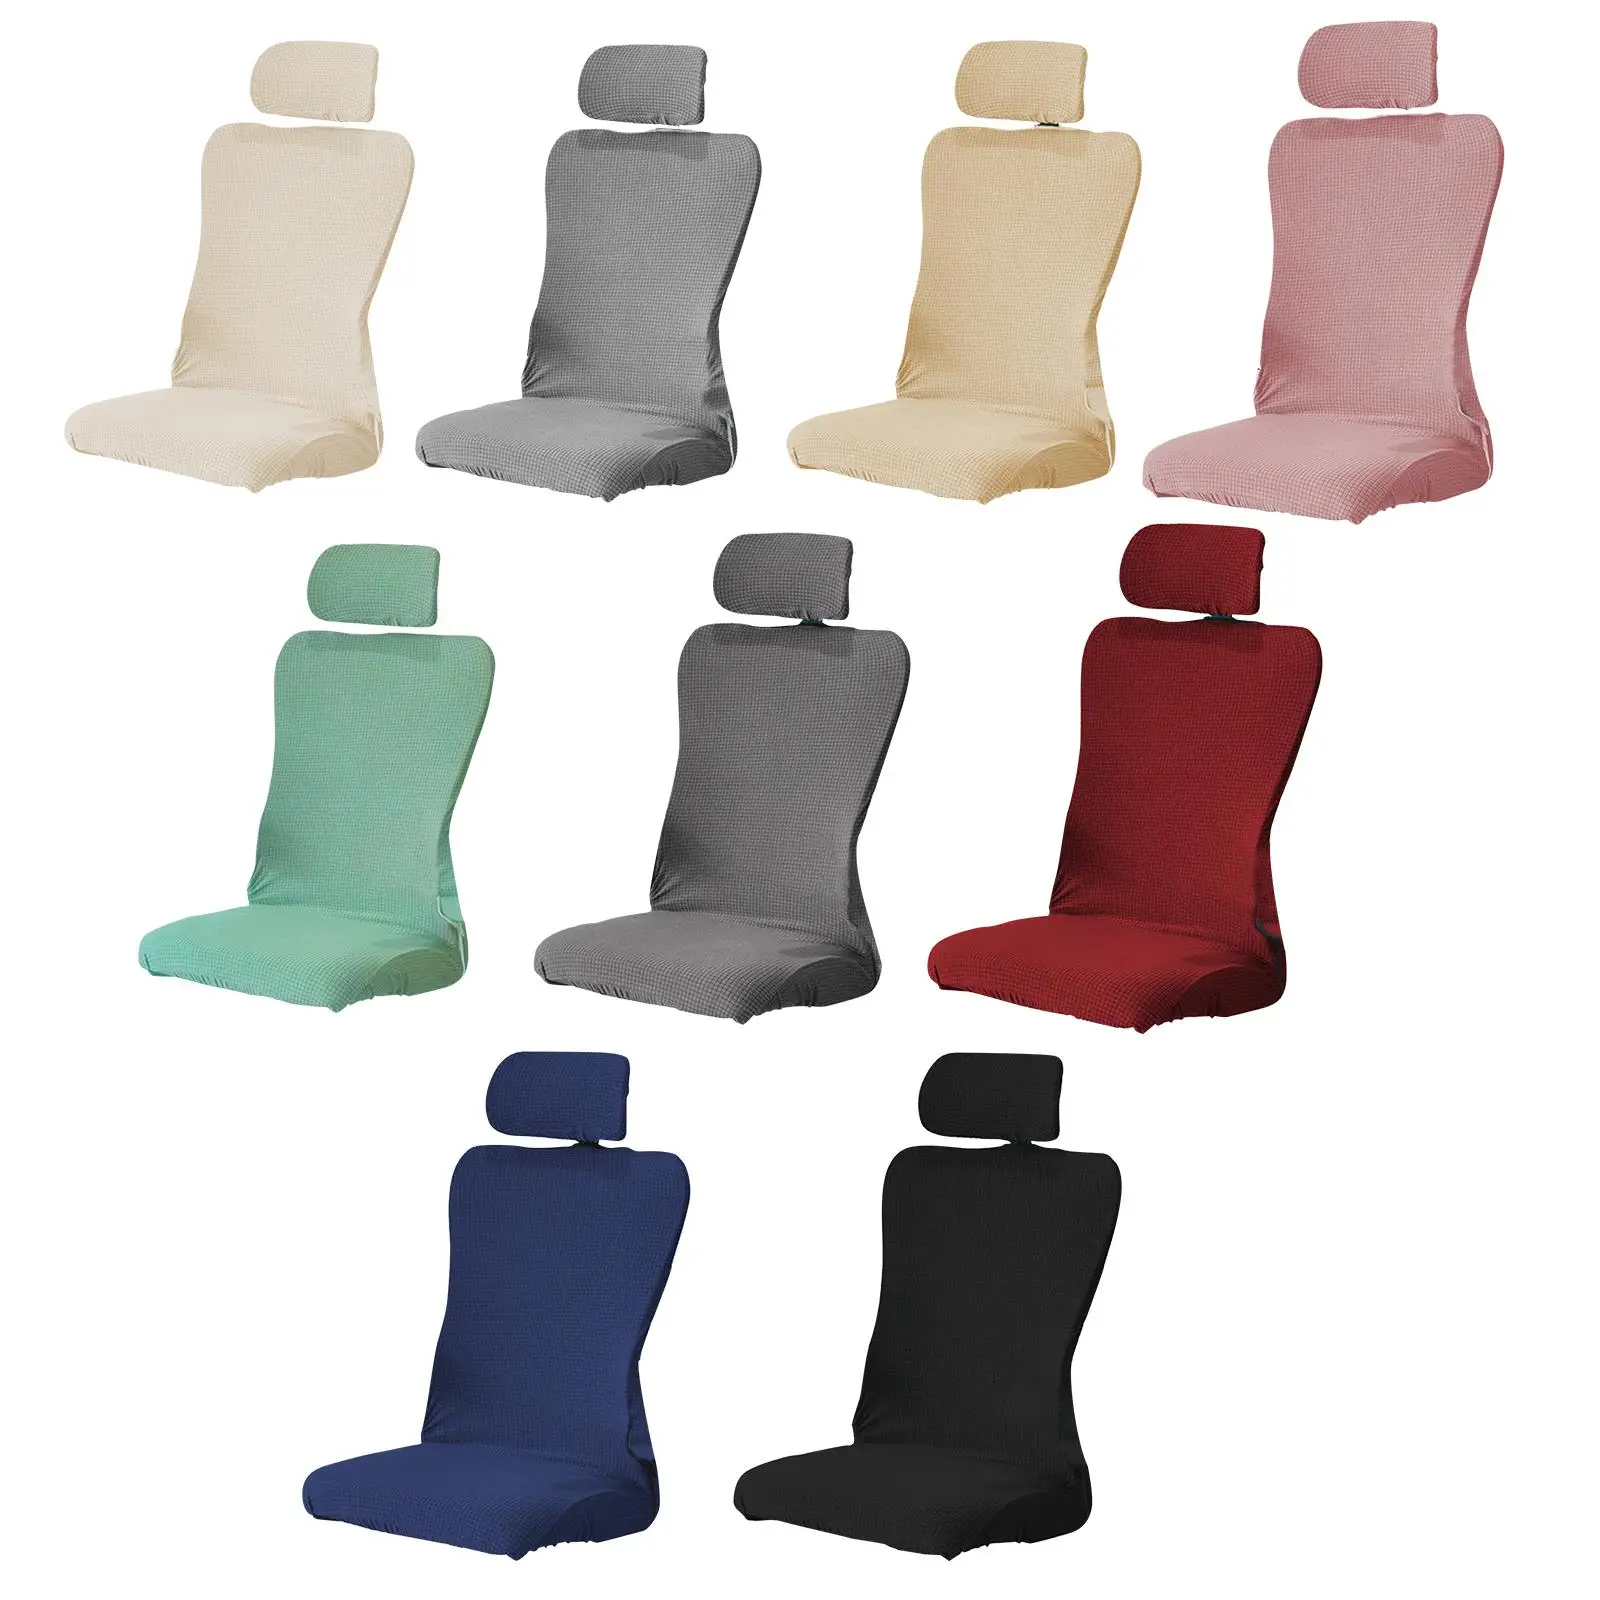 Office Chair Cover with Headrest Cover Water Resistant Seat Protector Stretchable Chair Slipcovers Washable for Dining Room